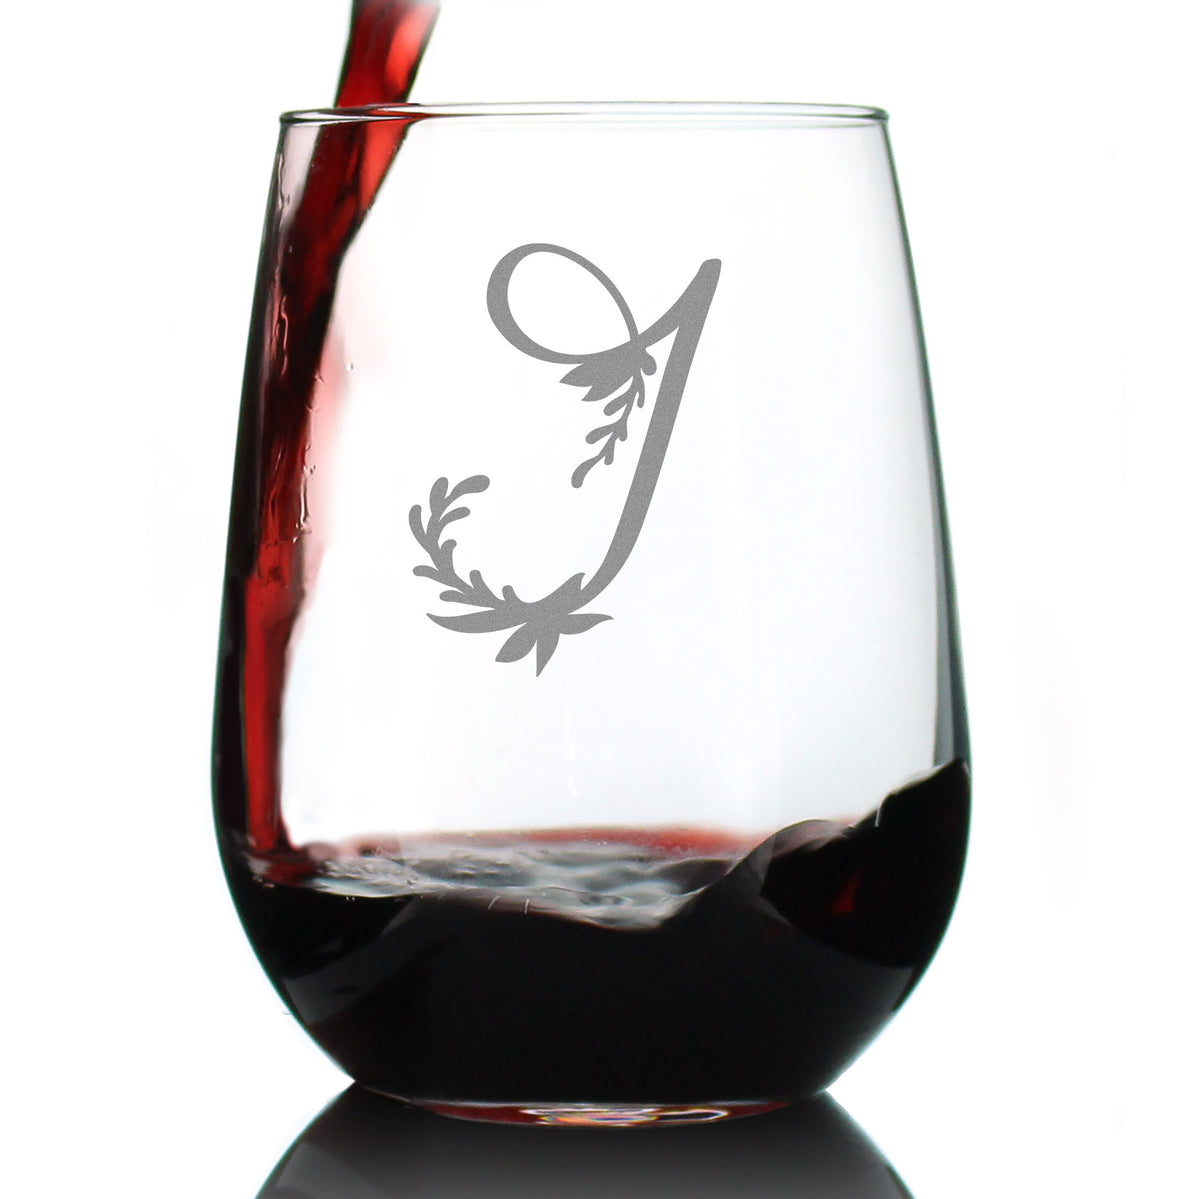 Monogram Floral Letter J - Stemless Wine Glass - Personalized Gifts for Women and Men - Large Engraved Glasses